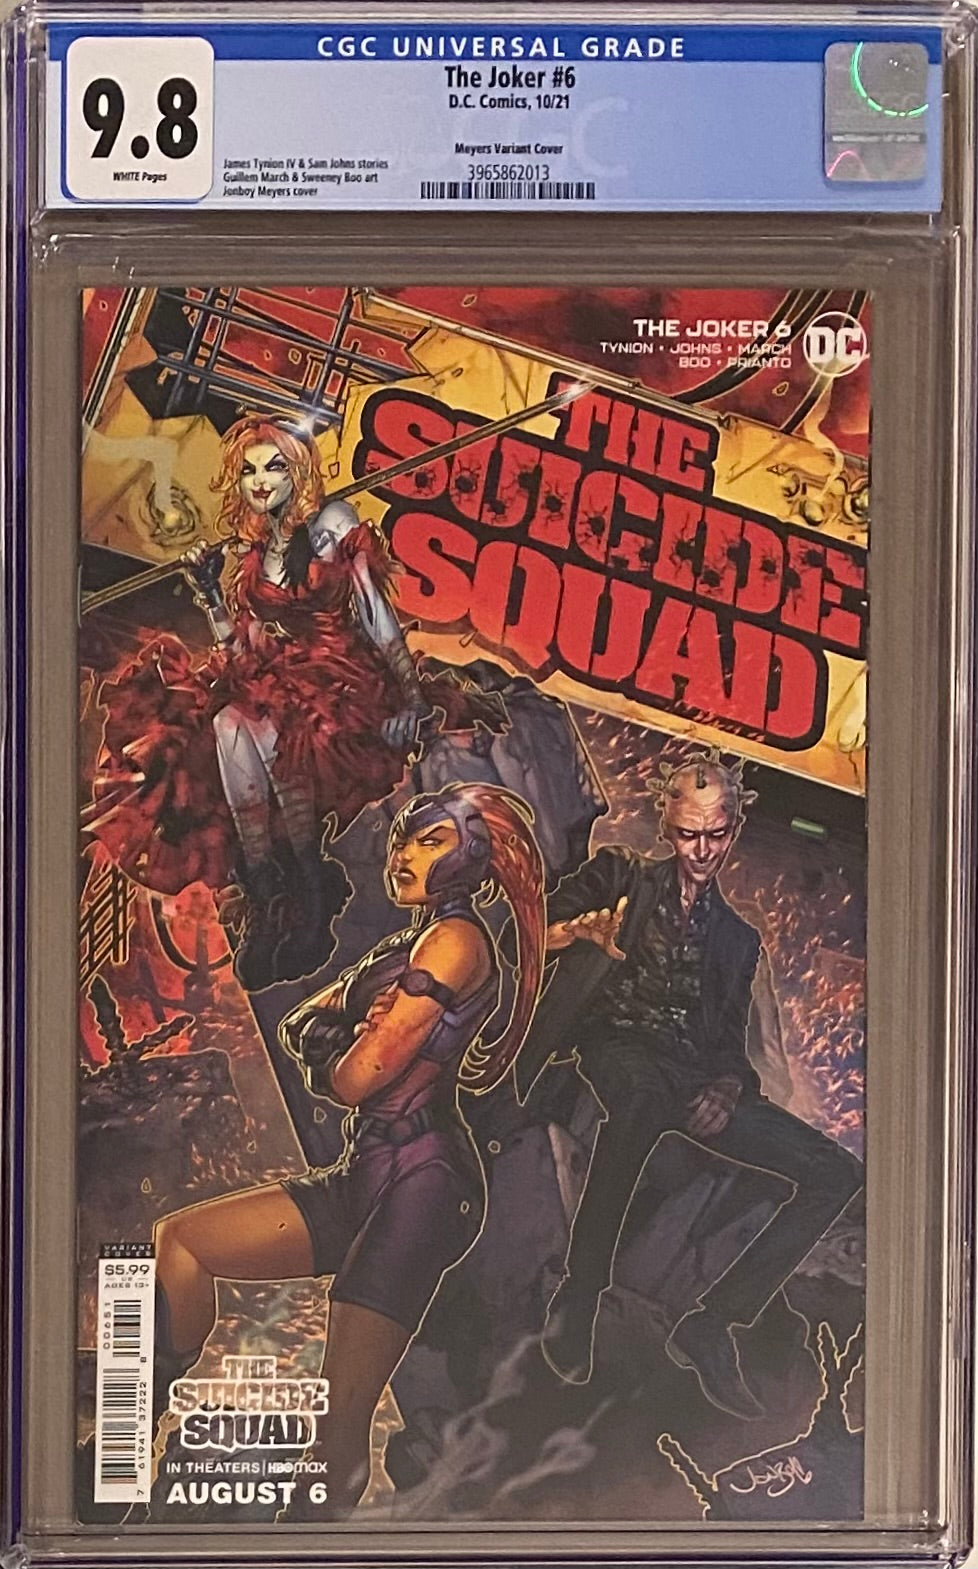 The Joker #6 Meyers Suicide Squad Variant CGC 9.8